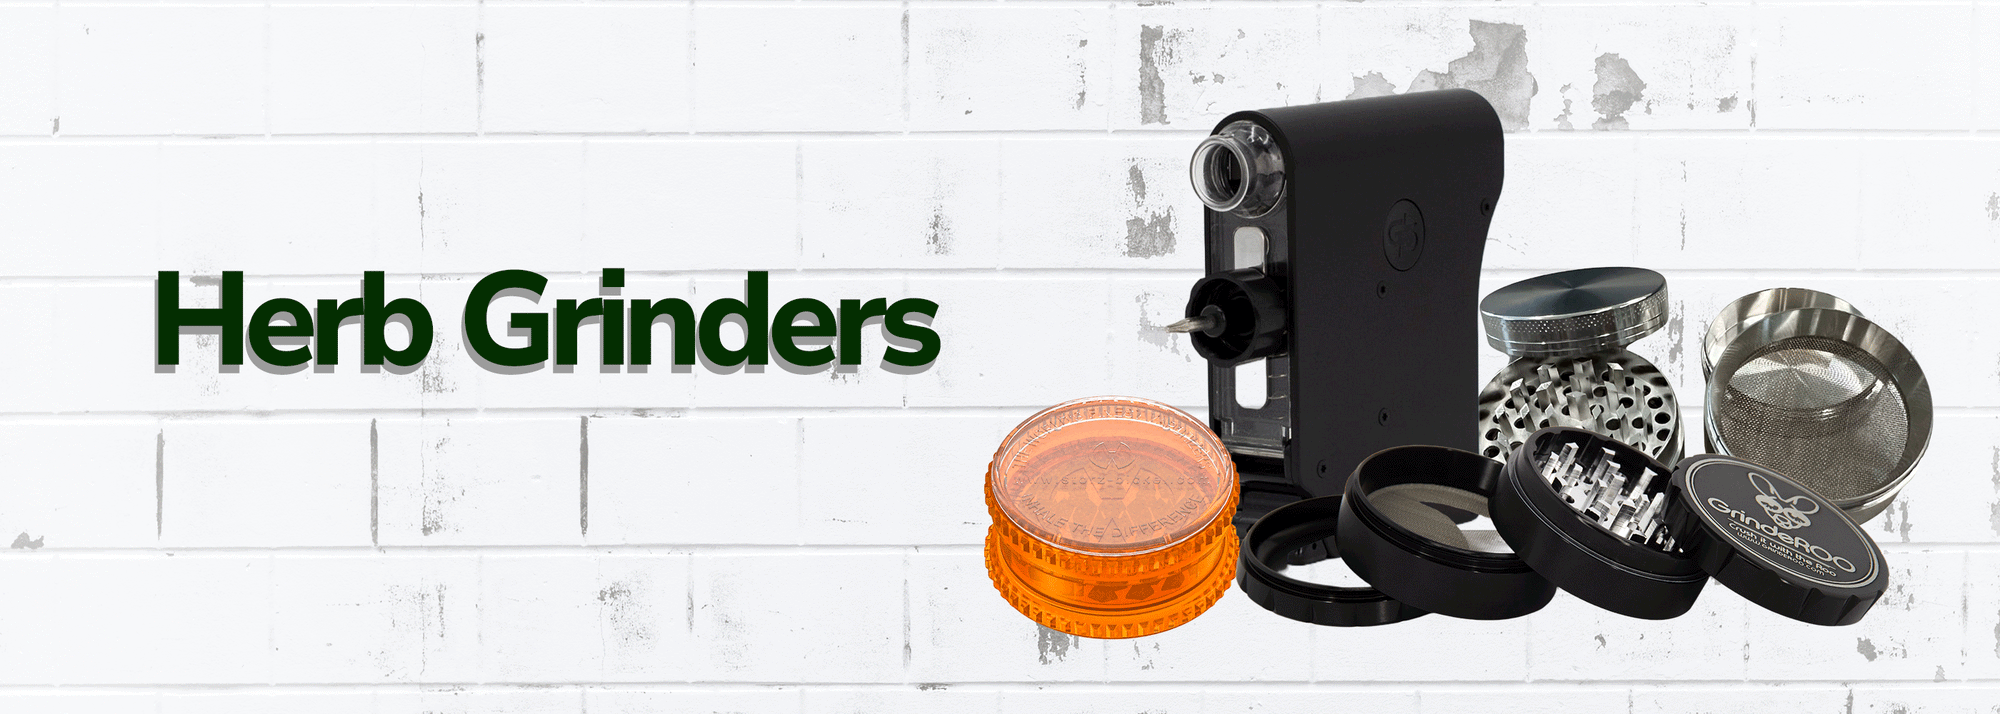 Types Of Weed Grinders: A Guide To Different Weed Grinders